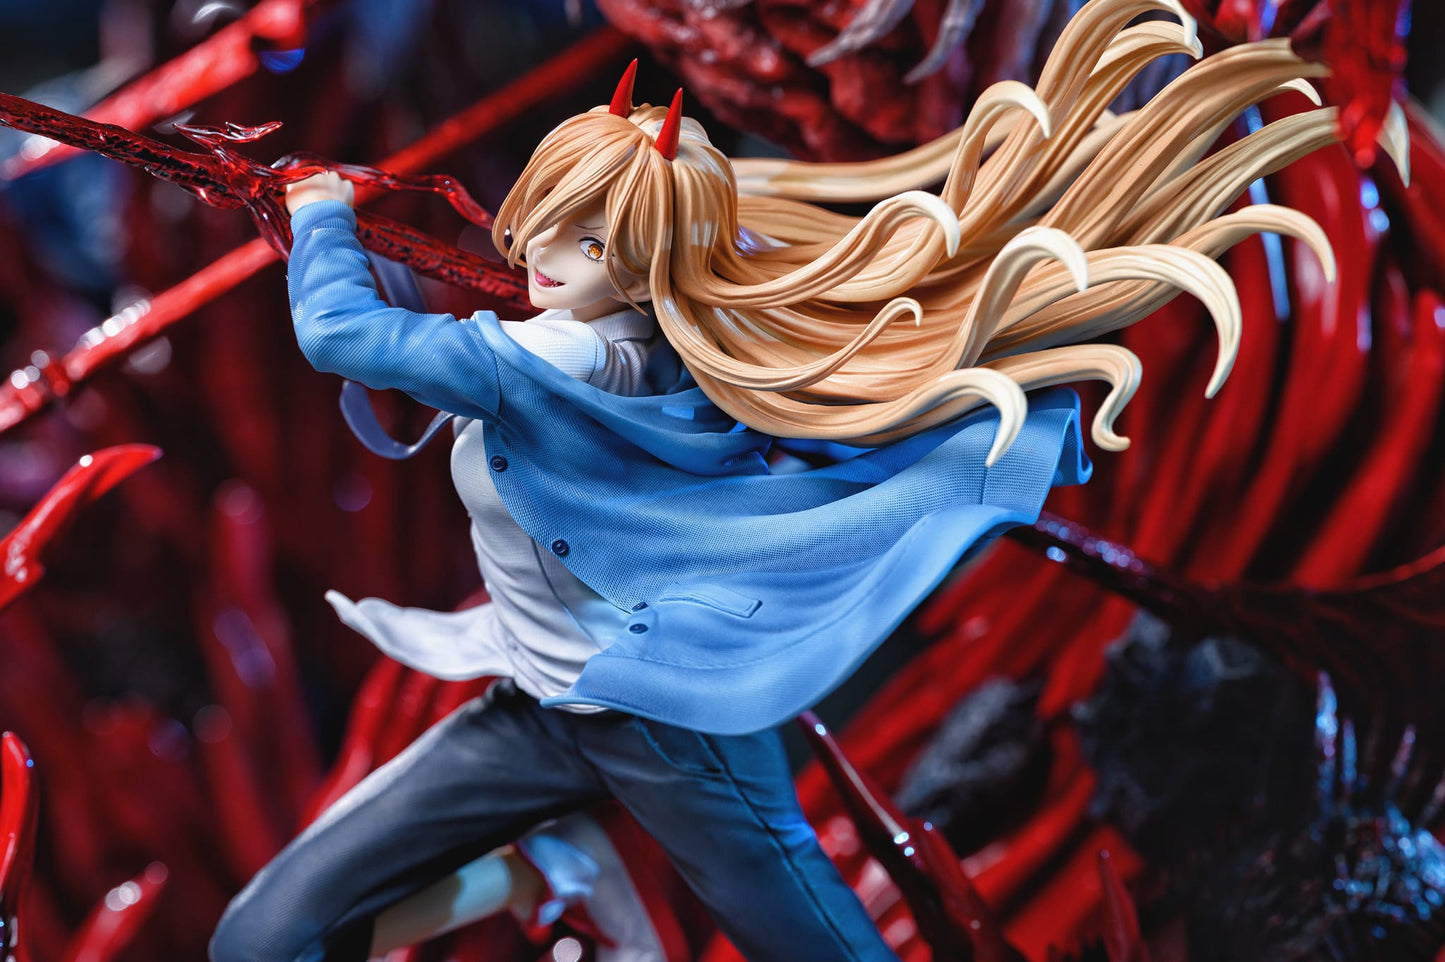 [IN STOCK] Chainsaw Man - YoYo Studio - Power 1/6 (Price Does Not Include Shipping - Please Read Description)